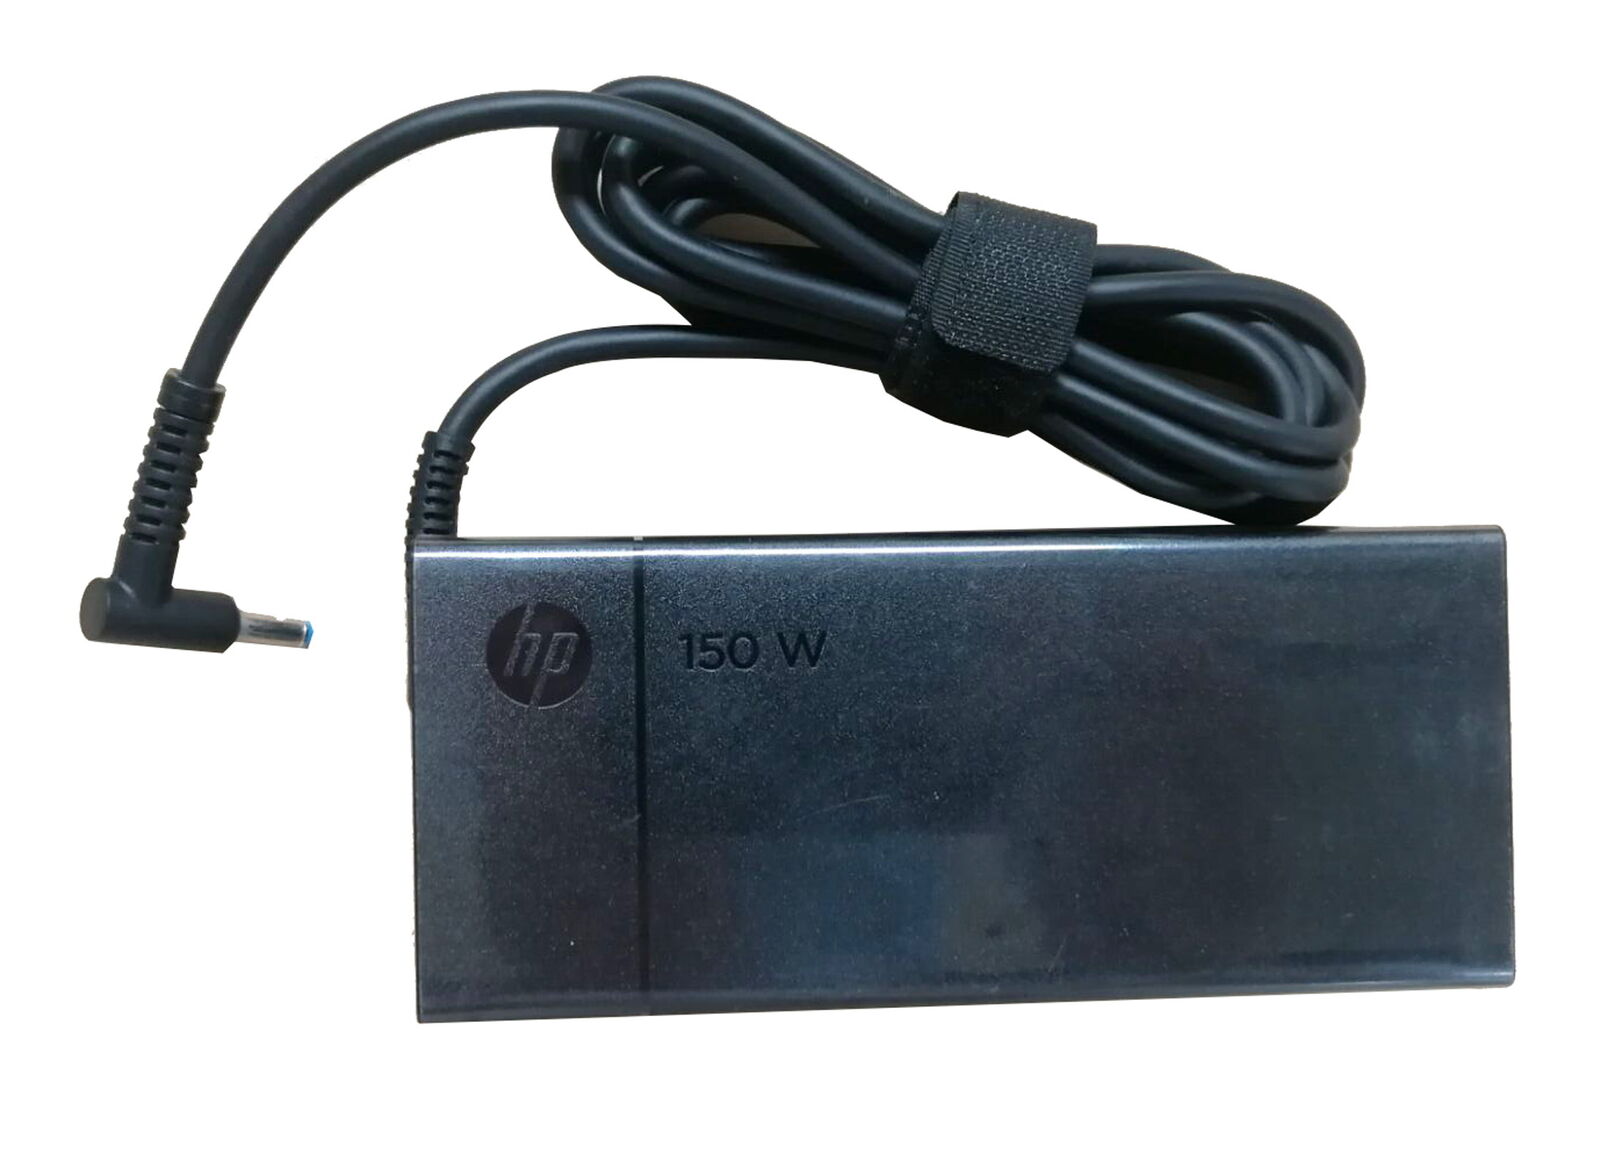 NEW Genuine 19.5V 7.7A 150W AC Adapter For HP ZBook 15 G3 Workstation Power Supply Charger